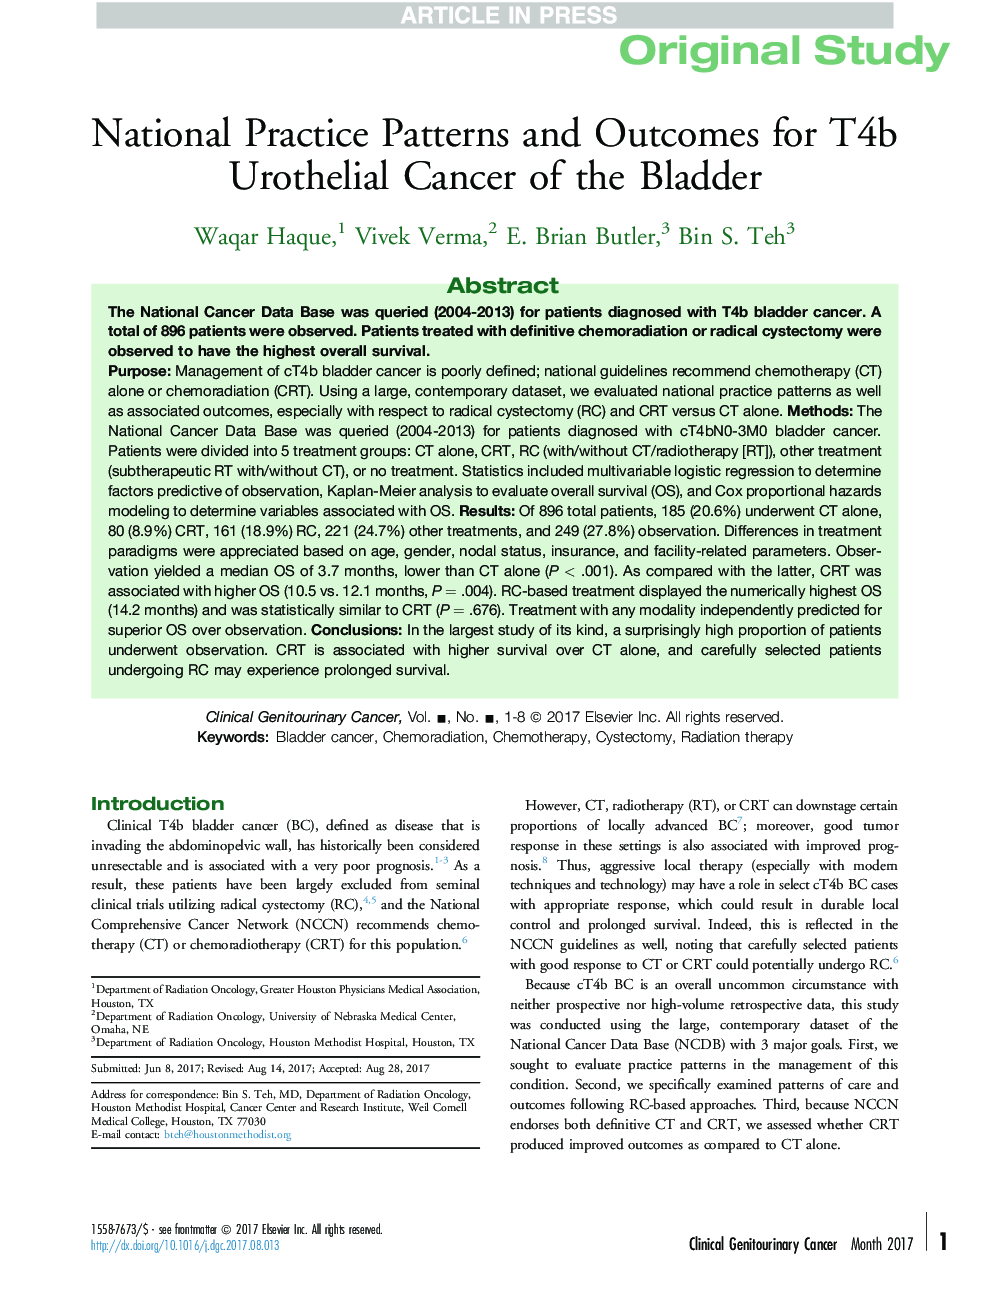 National Practice Patterns and Outcomes for T4b Urothelial Cancer of the Bladder